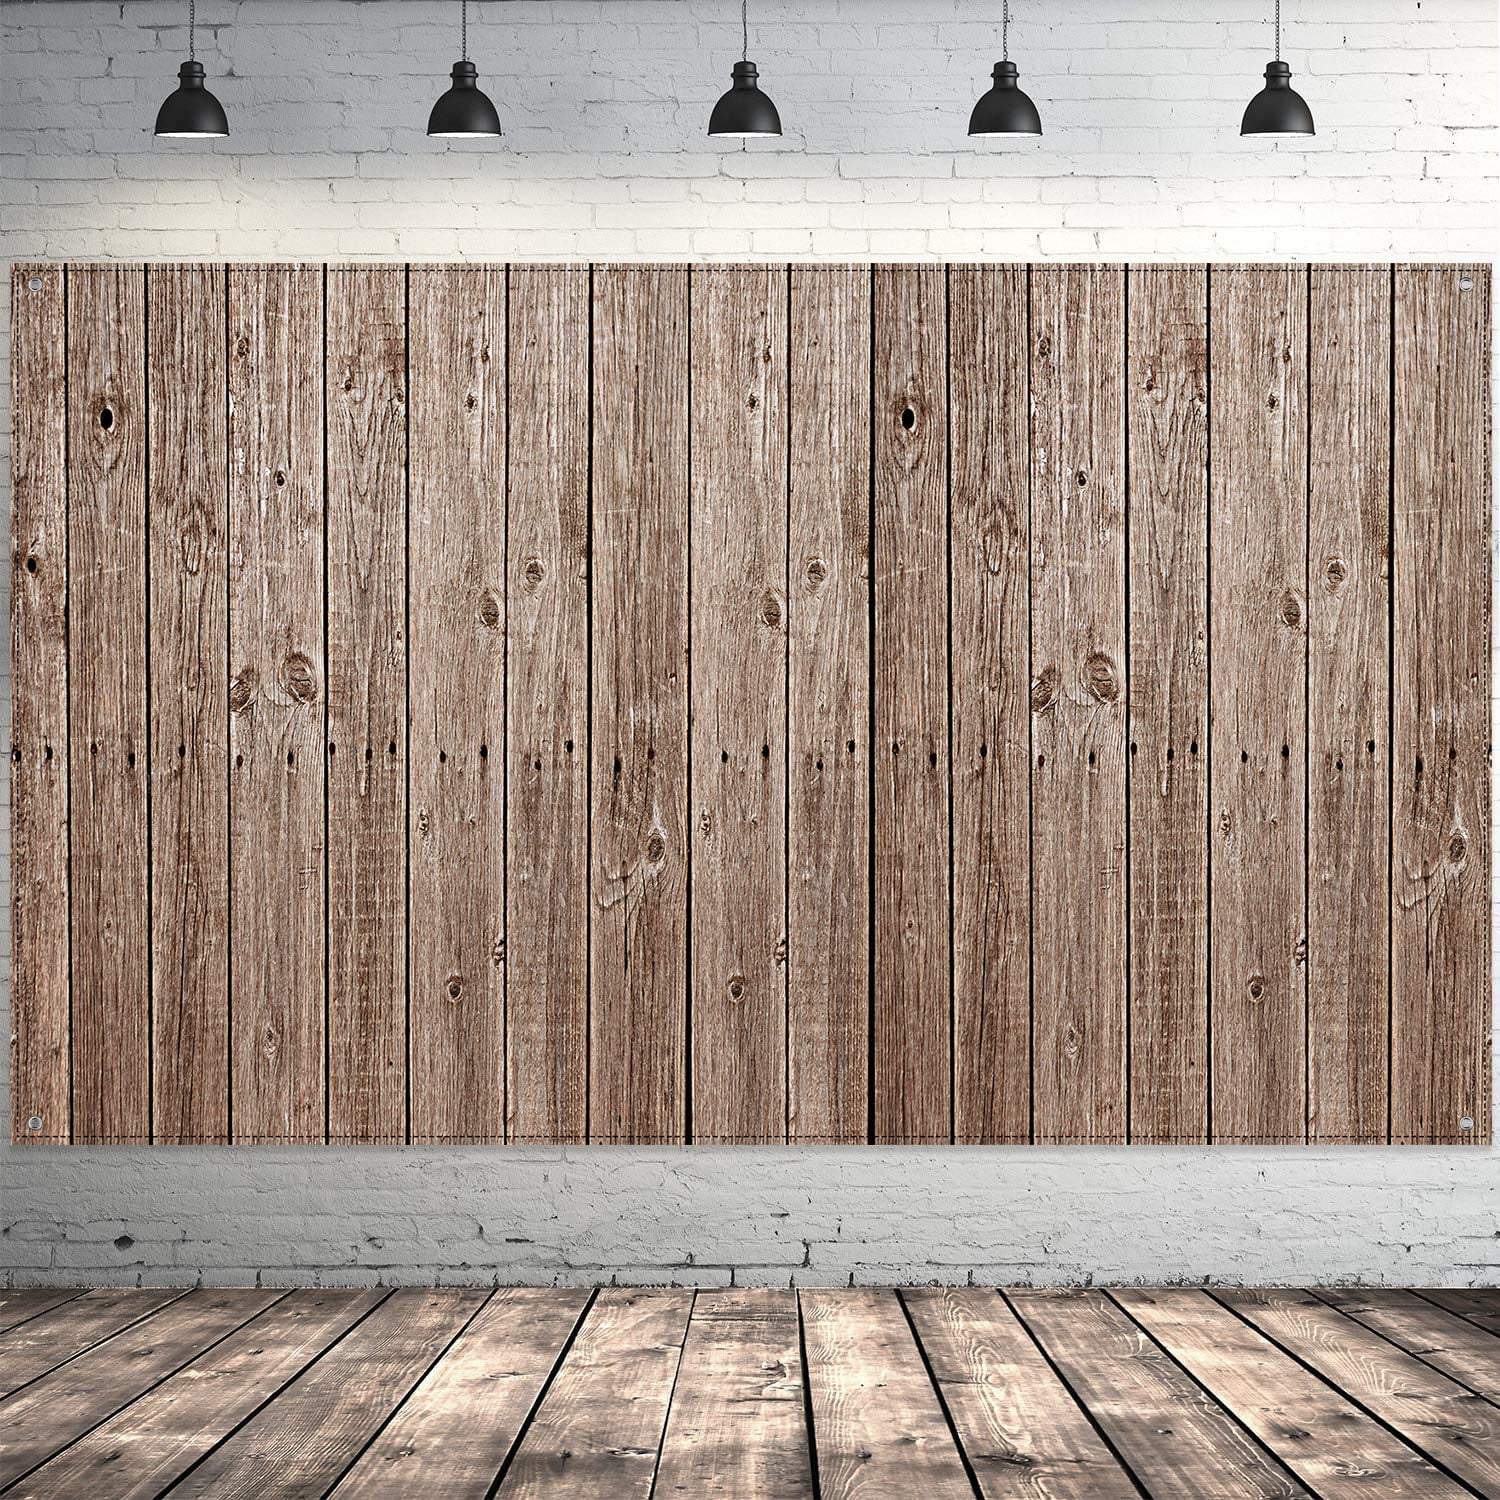 Details about   Christmas Barn Wood Backdrop Party Decor 3 Pieces 